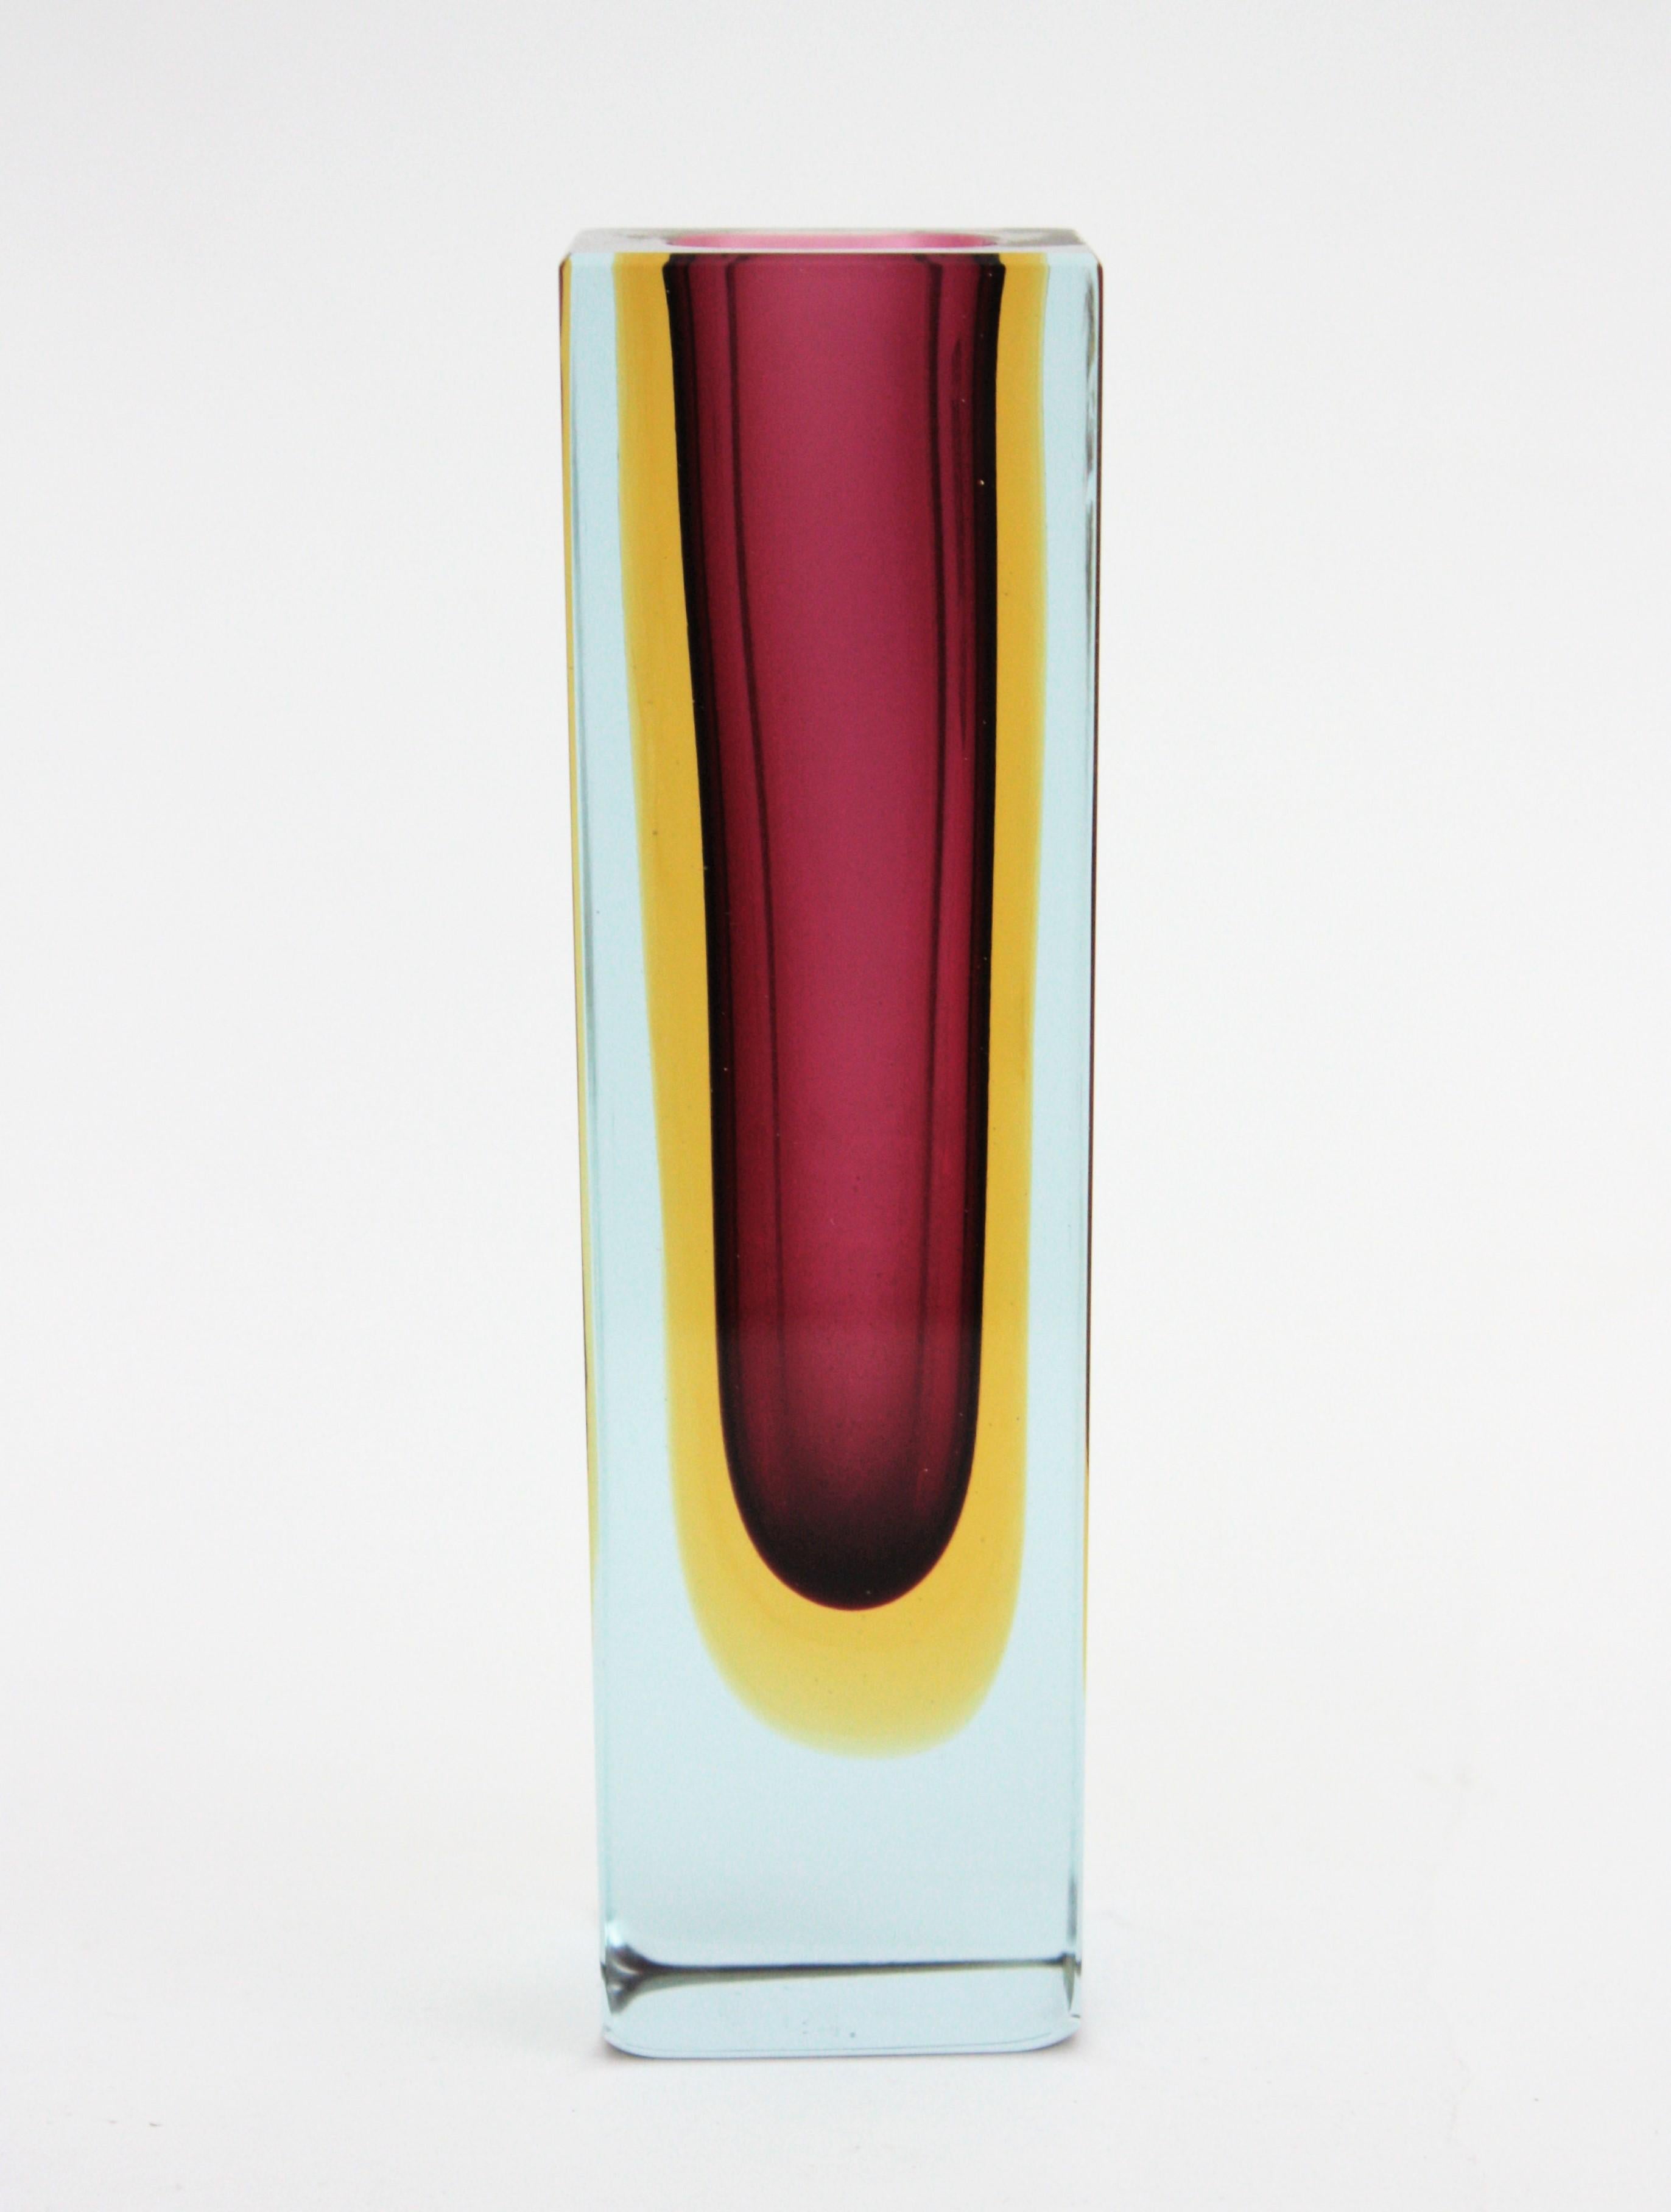 Lovely faceted Sommerso glass vase in purple, yellow and clear glass. Attributed to Flavio Poli for Seguso. Italy, 1960s.
Burgundy / purple glass with a layer in yellow glass submerged into clear glass using the Sommerso technique.
Place it alone